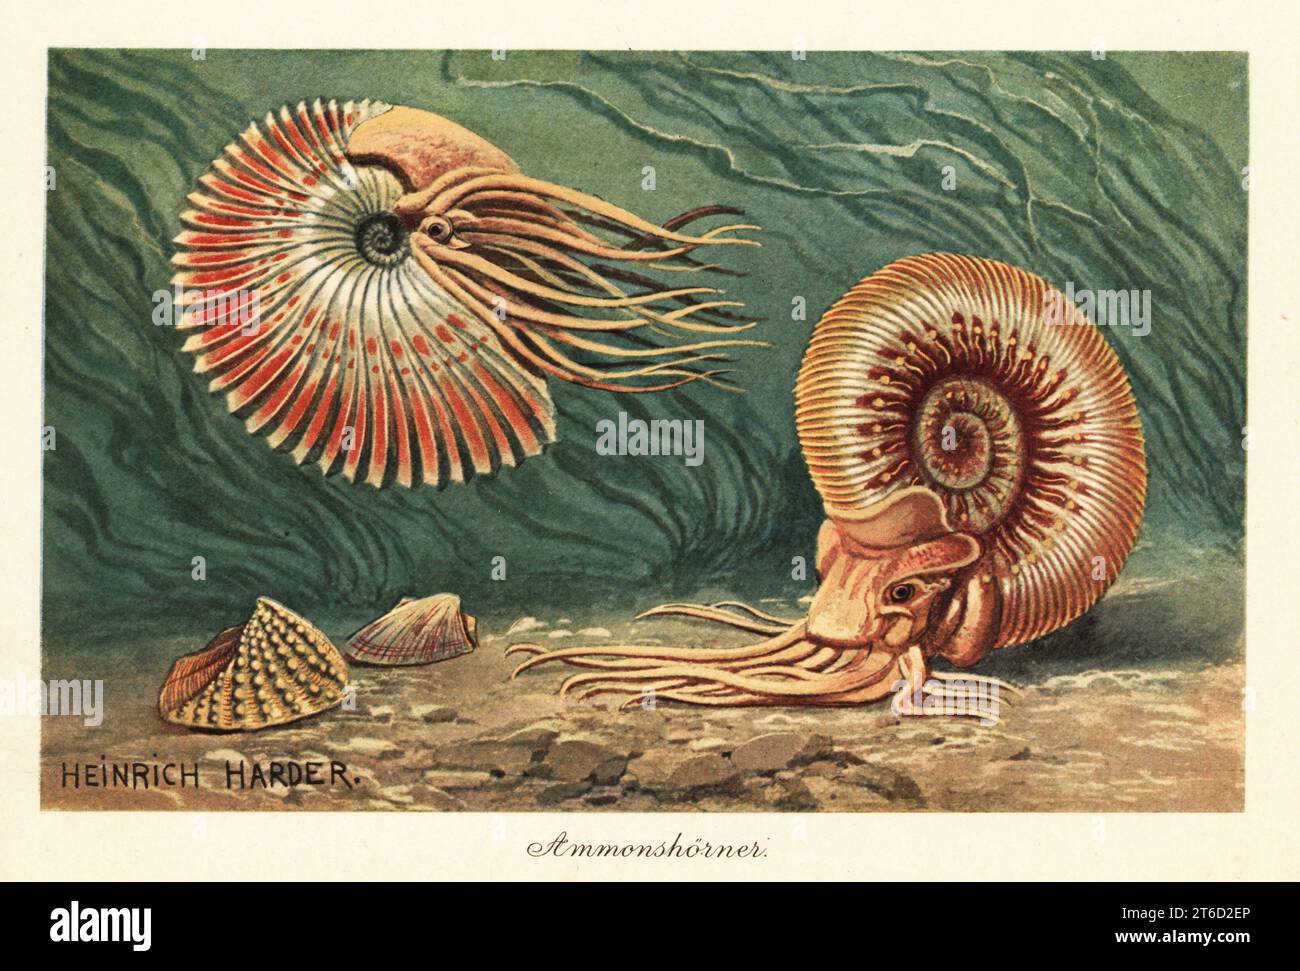 Extinct ammonites swimming in the ocean. Ammonoids, group of extinct marine mollusc animals in the subclass Ammonoidea of the class Cephalopoda. Ammonshorner. Colour printed illustration by Heinrich Harder from Wilhelm Bolsches Tiere der Urwelt (Animals of the Prehistoric World), Reichardt Cocoa company, Hamburg, 1908. Heinrich Harder (1858-1935) was a German landscape artist and book illustrator. Stock Photo